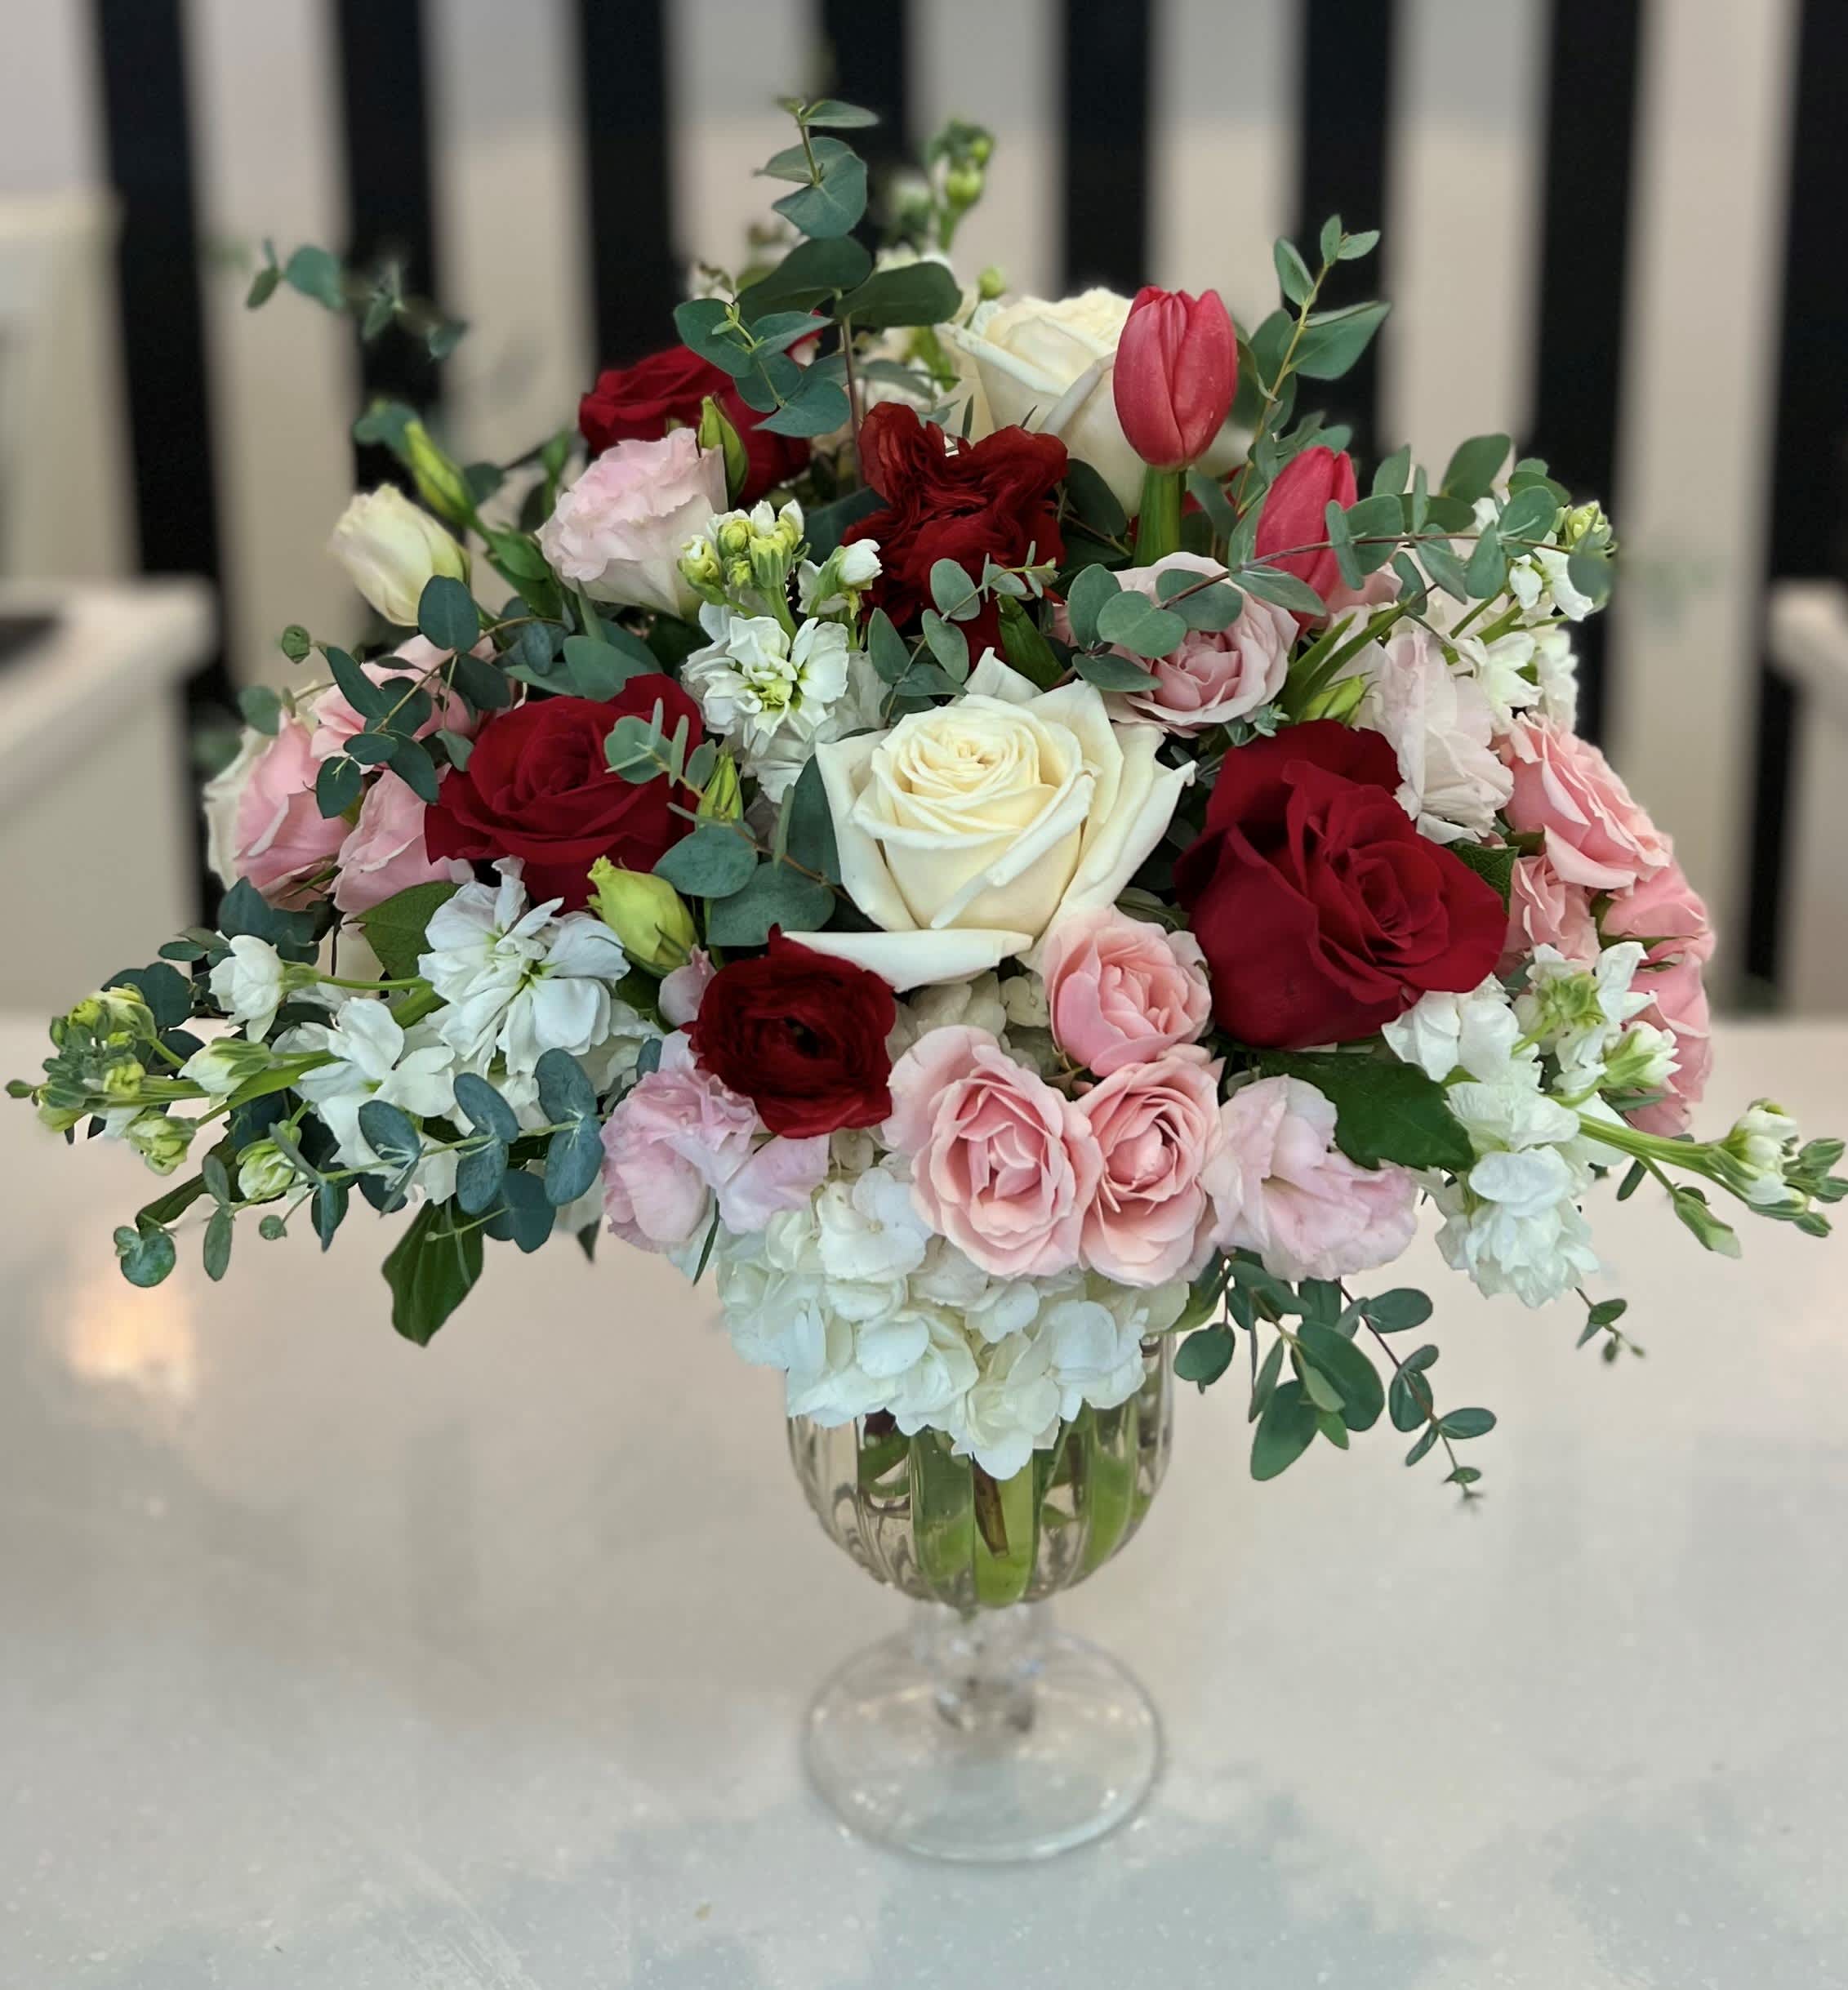 Romantic Mix - Roses, spray roses, tulips, stock, lizzy and renunculas